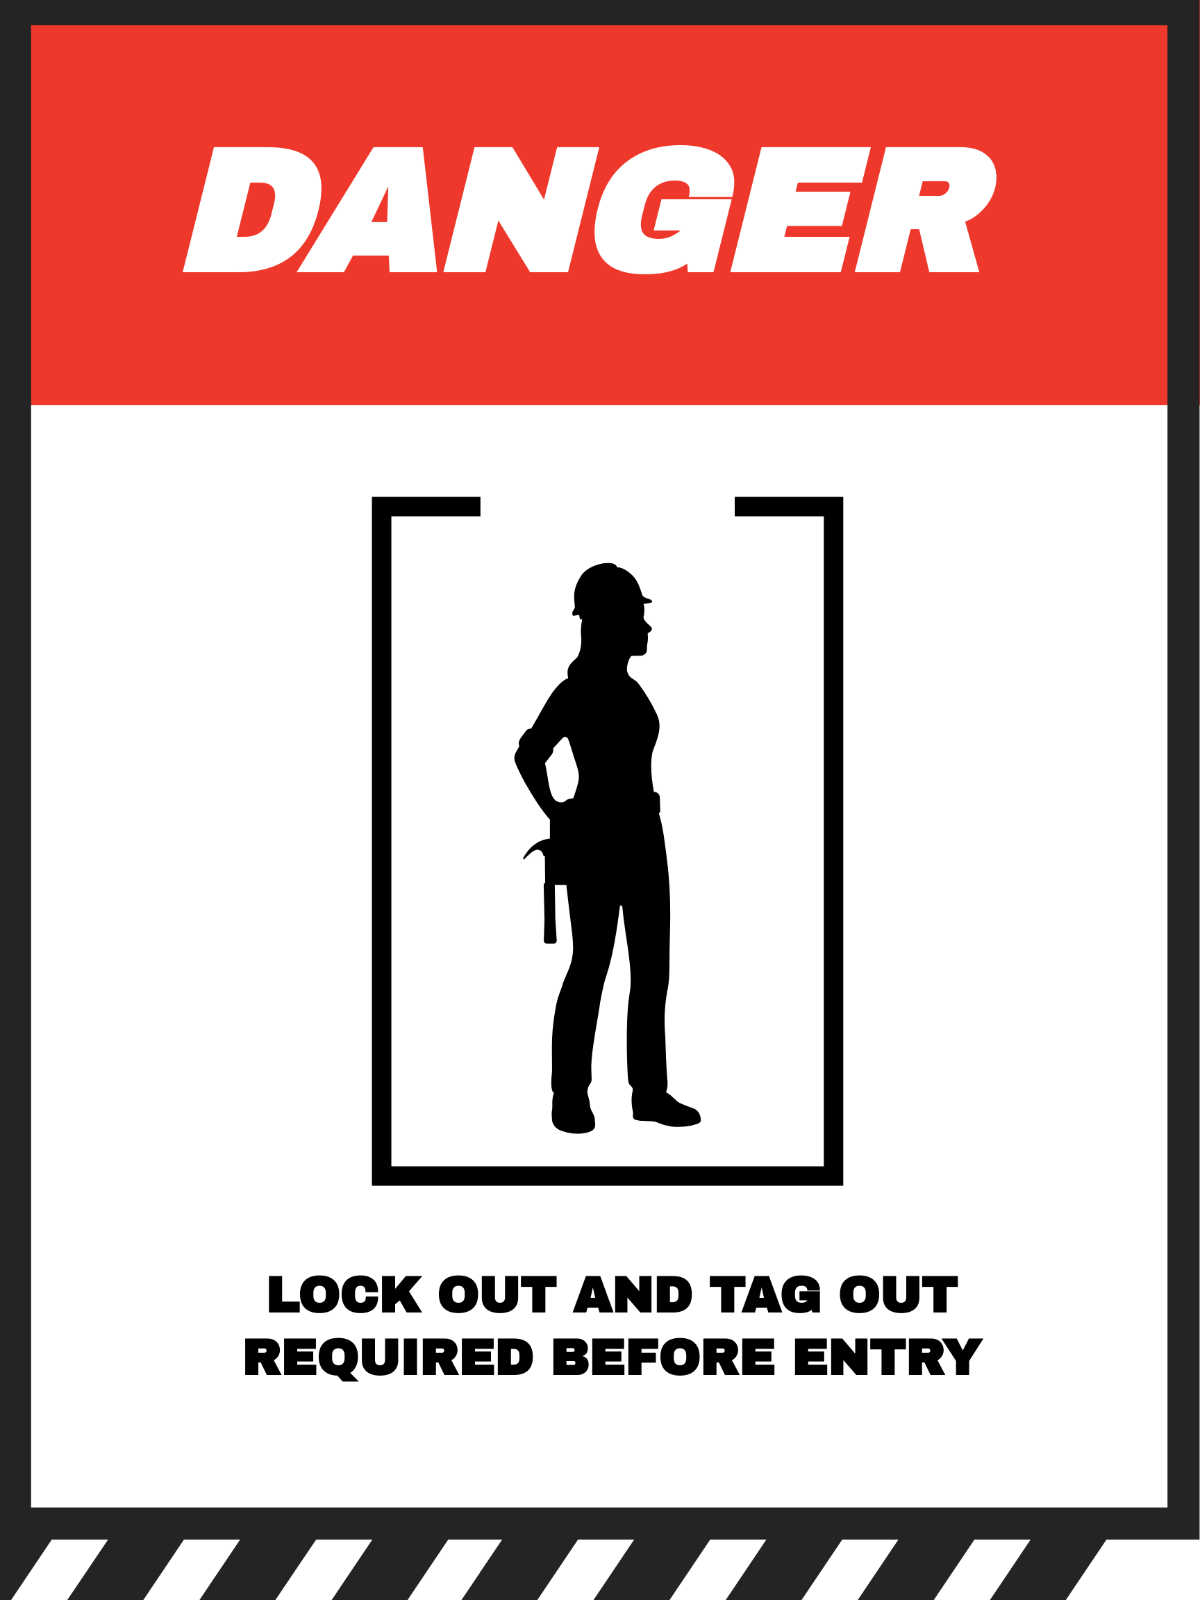 Danger Confined Space/Keep Locked Stanchion Sign Template